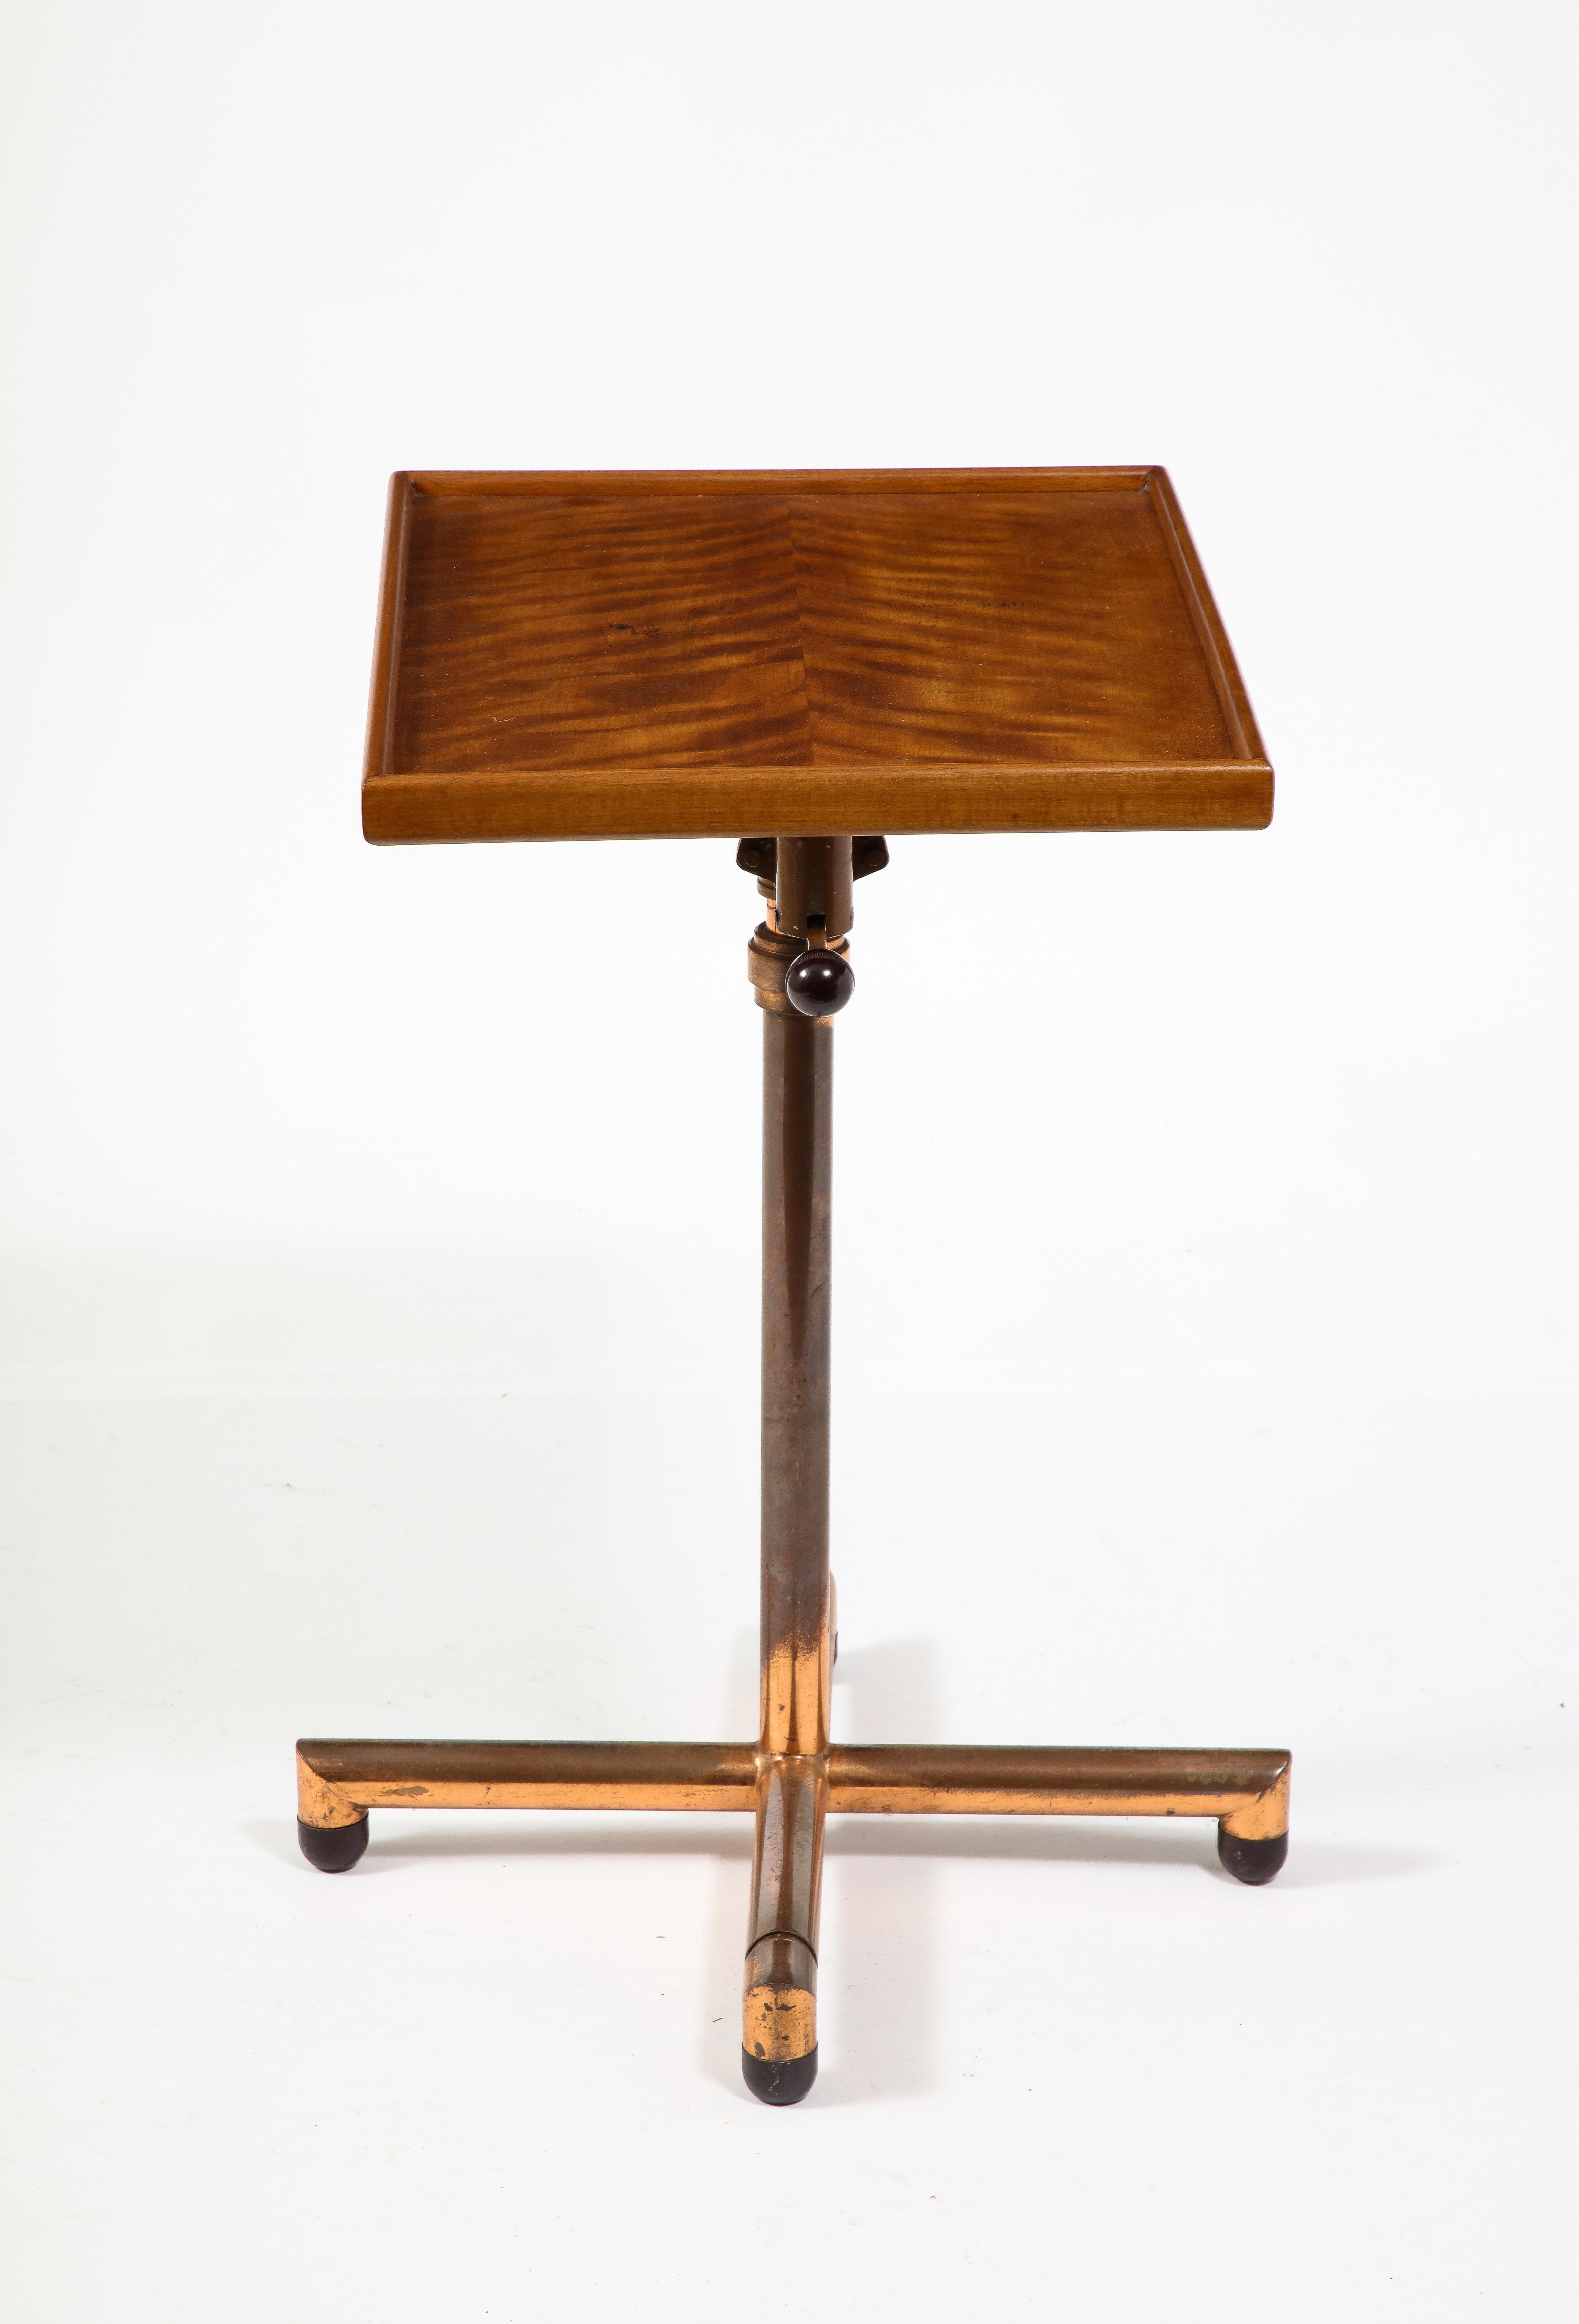 French Adjustable Copper & Ash Table By Francois Caruelle, France 1930's